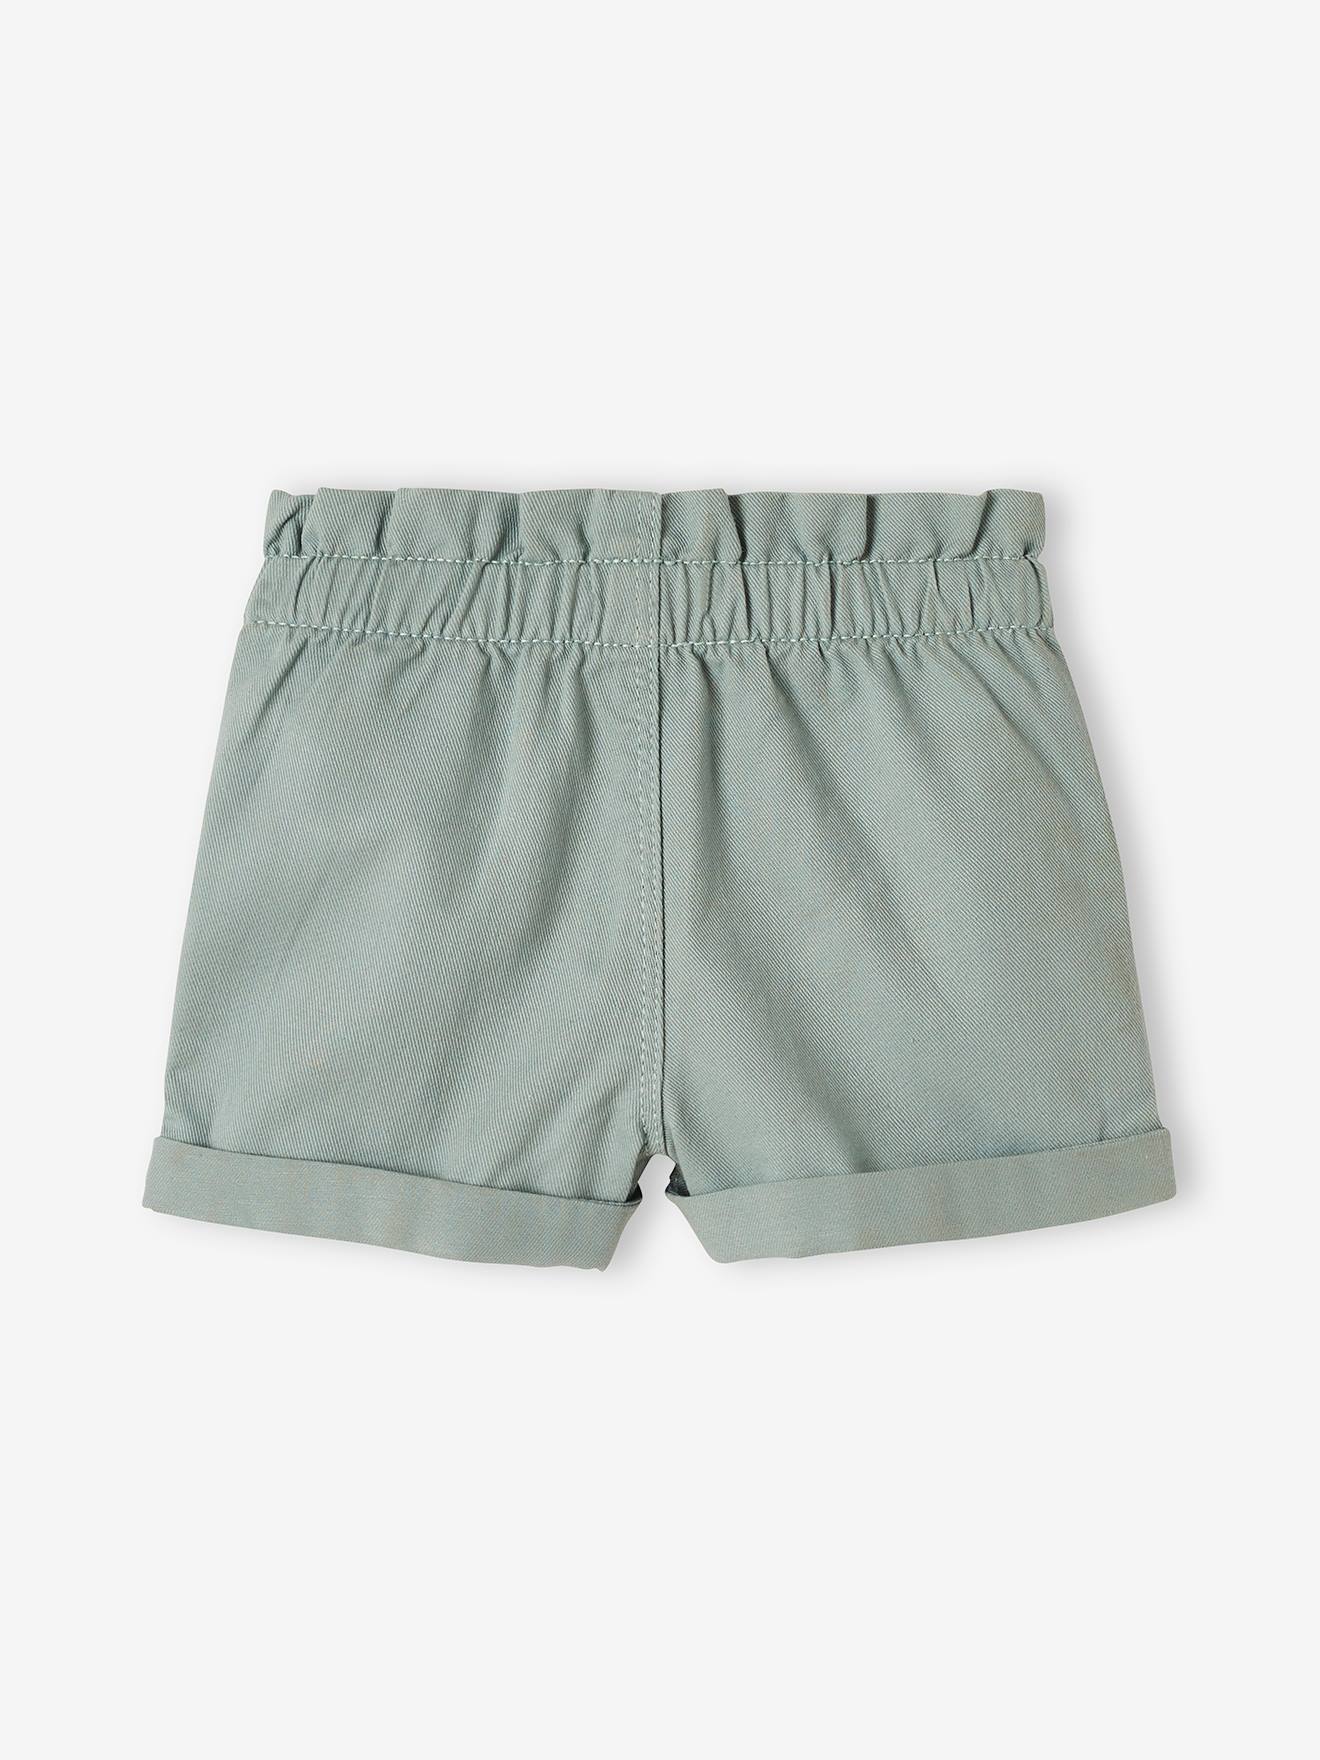 Shorts with Elasticated Waistband, for Babies - green medium solid, Baby